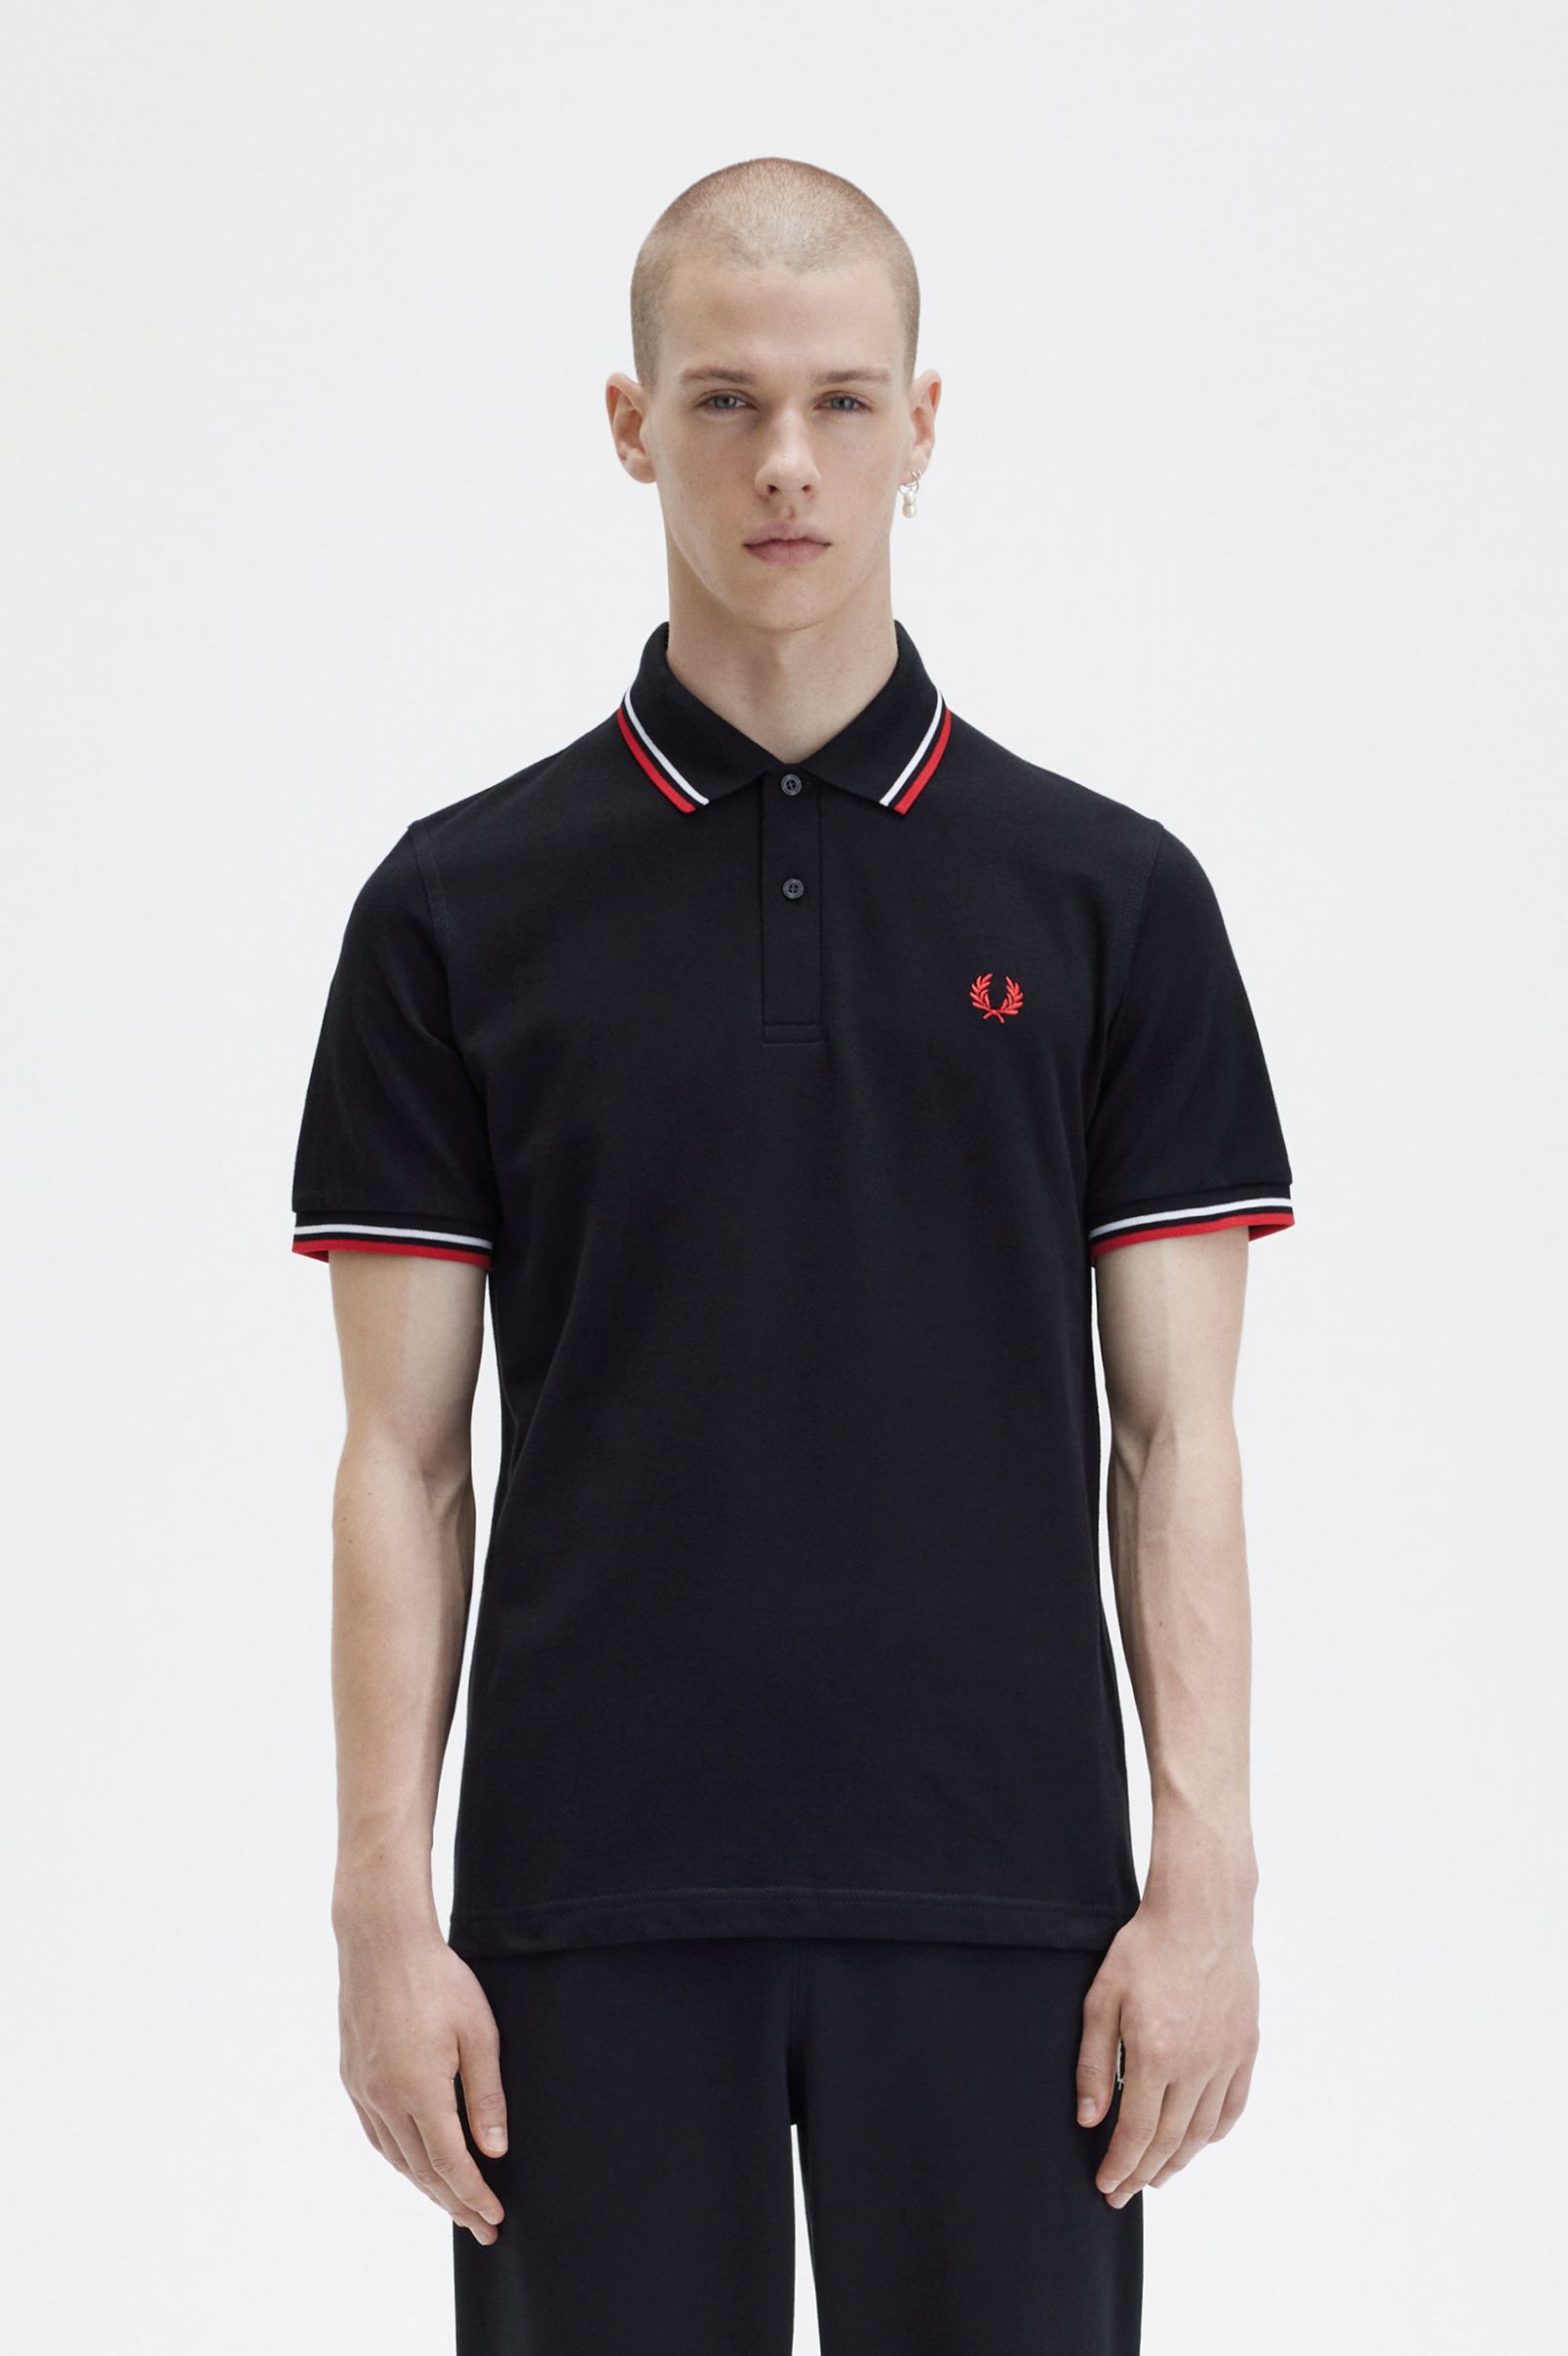 Scheiden afdeling Voorkomen M12 - Black / White / Bright Red | The Fred Perry Shirt | Men's Short &  Long Sleeve Polo Shirts | Fred Perry US